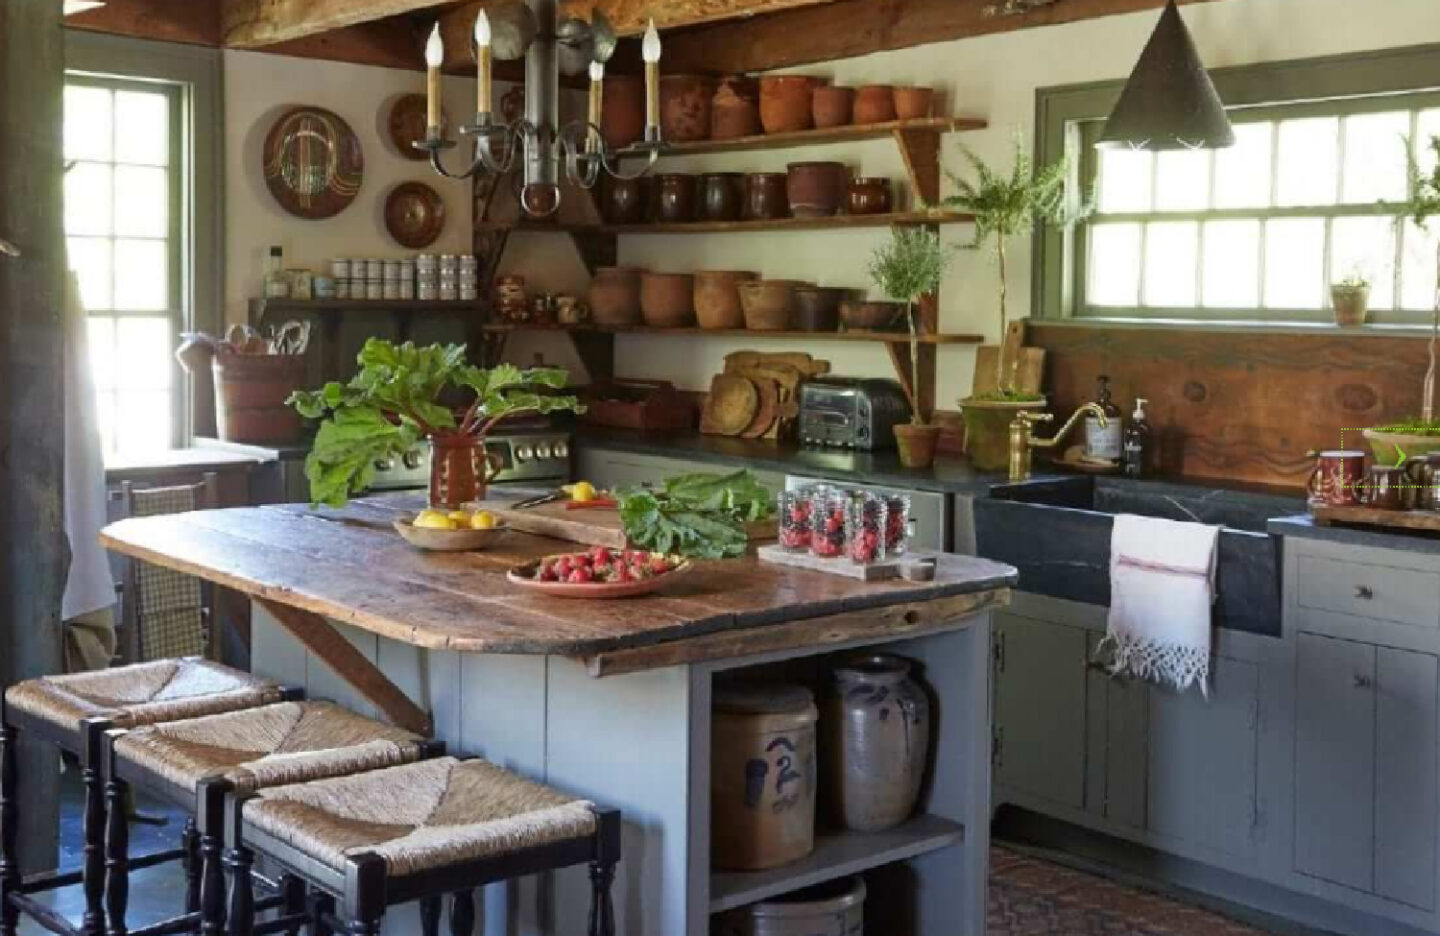 A glorious rustic country kitchen with open shelves and chandelier - from Nora Murphy's Country House book.